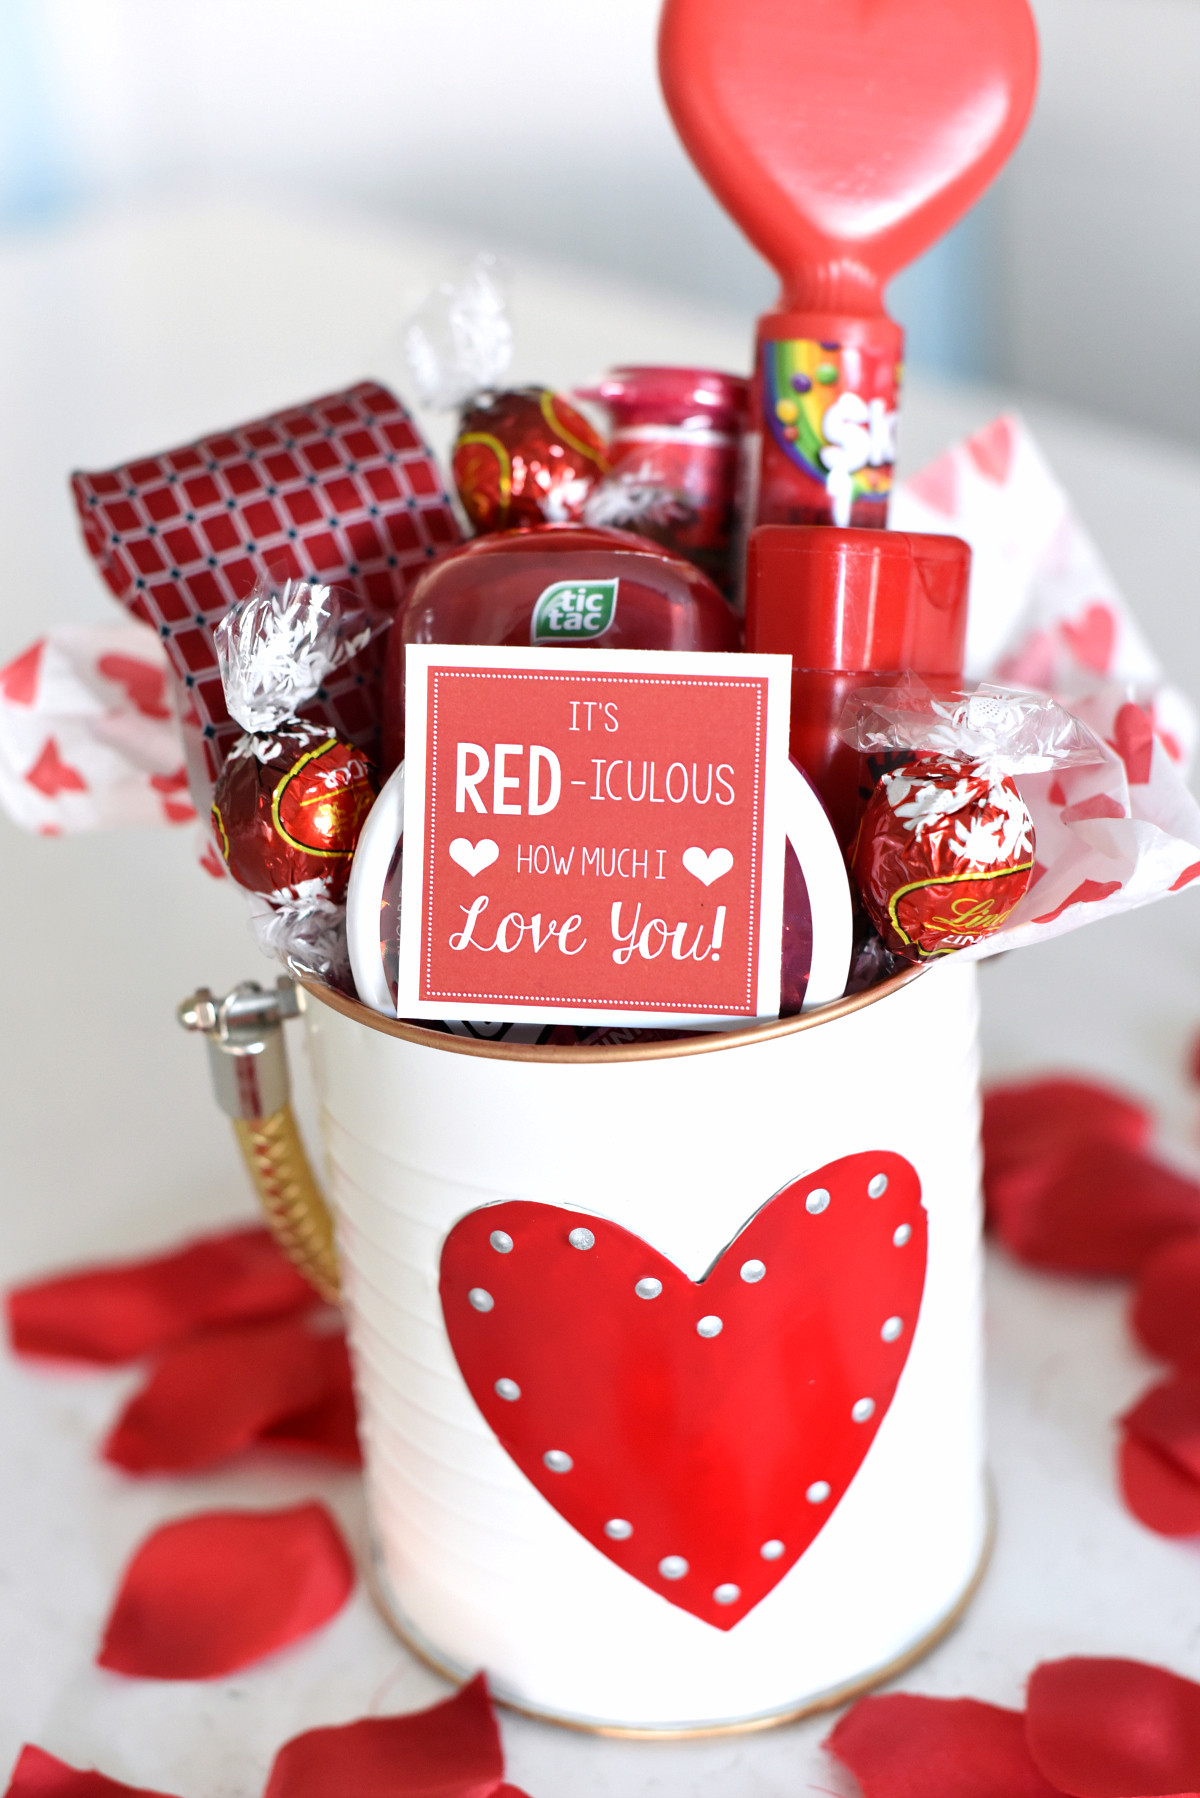 Valentine'S Day Gift Delivery Ideas
 Cute Valentine s Day Gift Idea RED iculous Basket